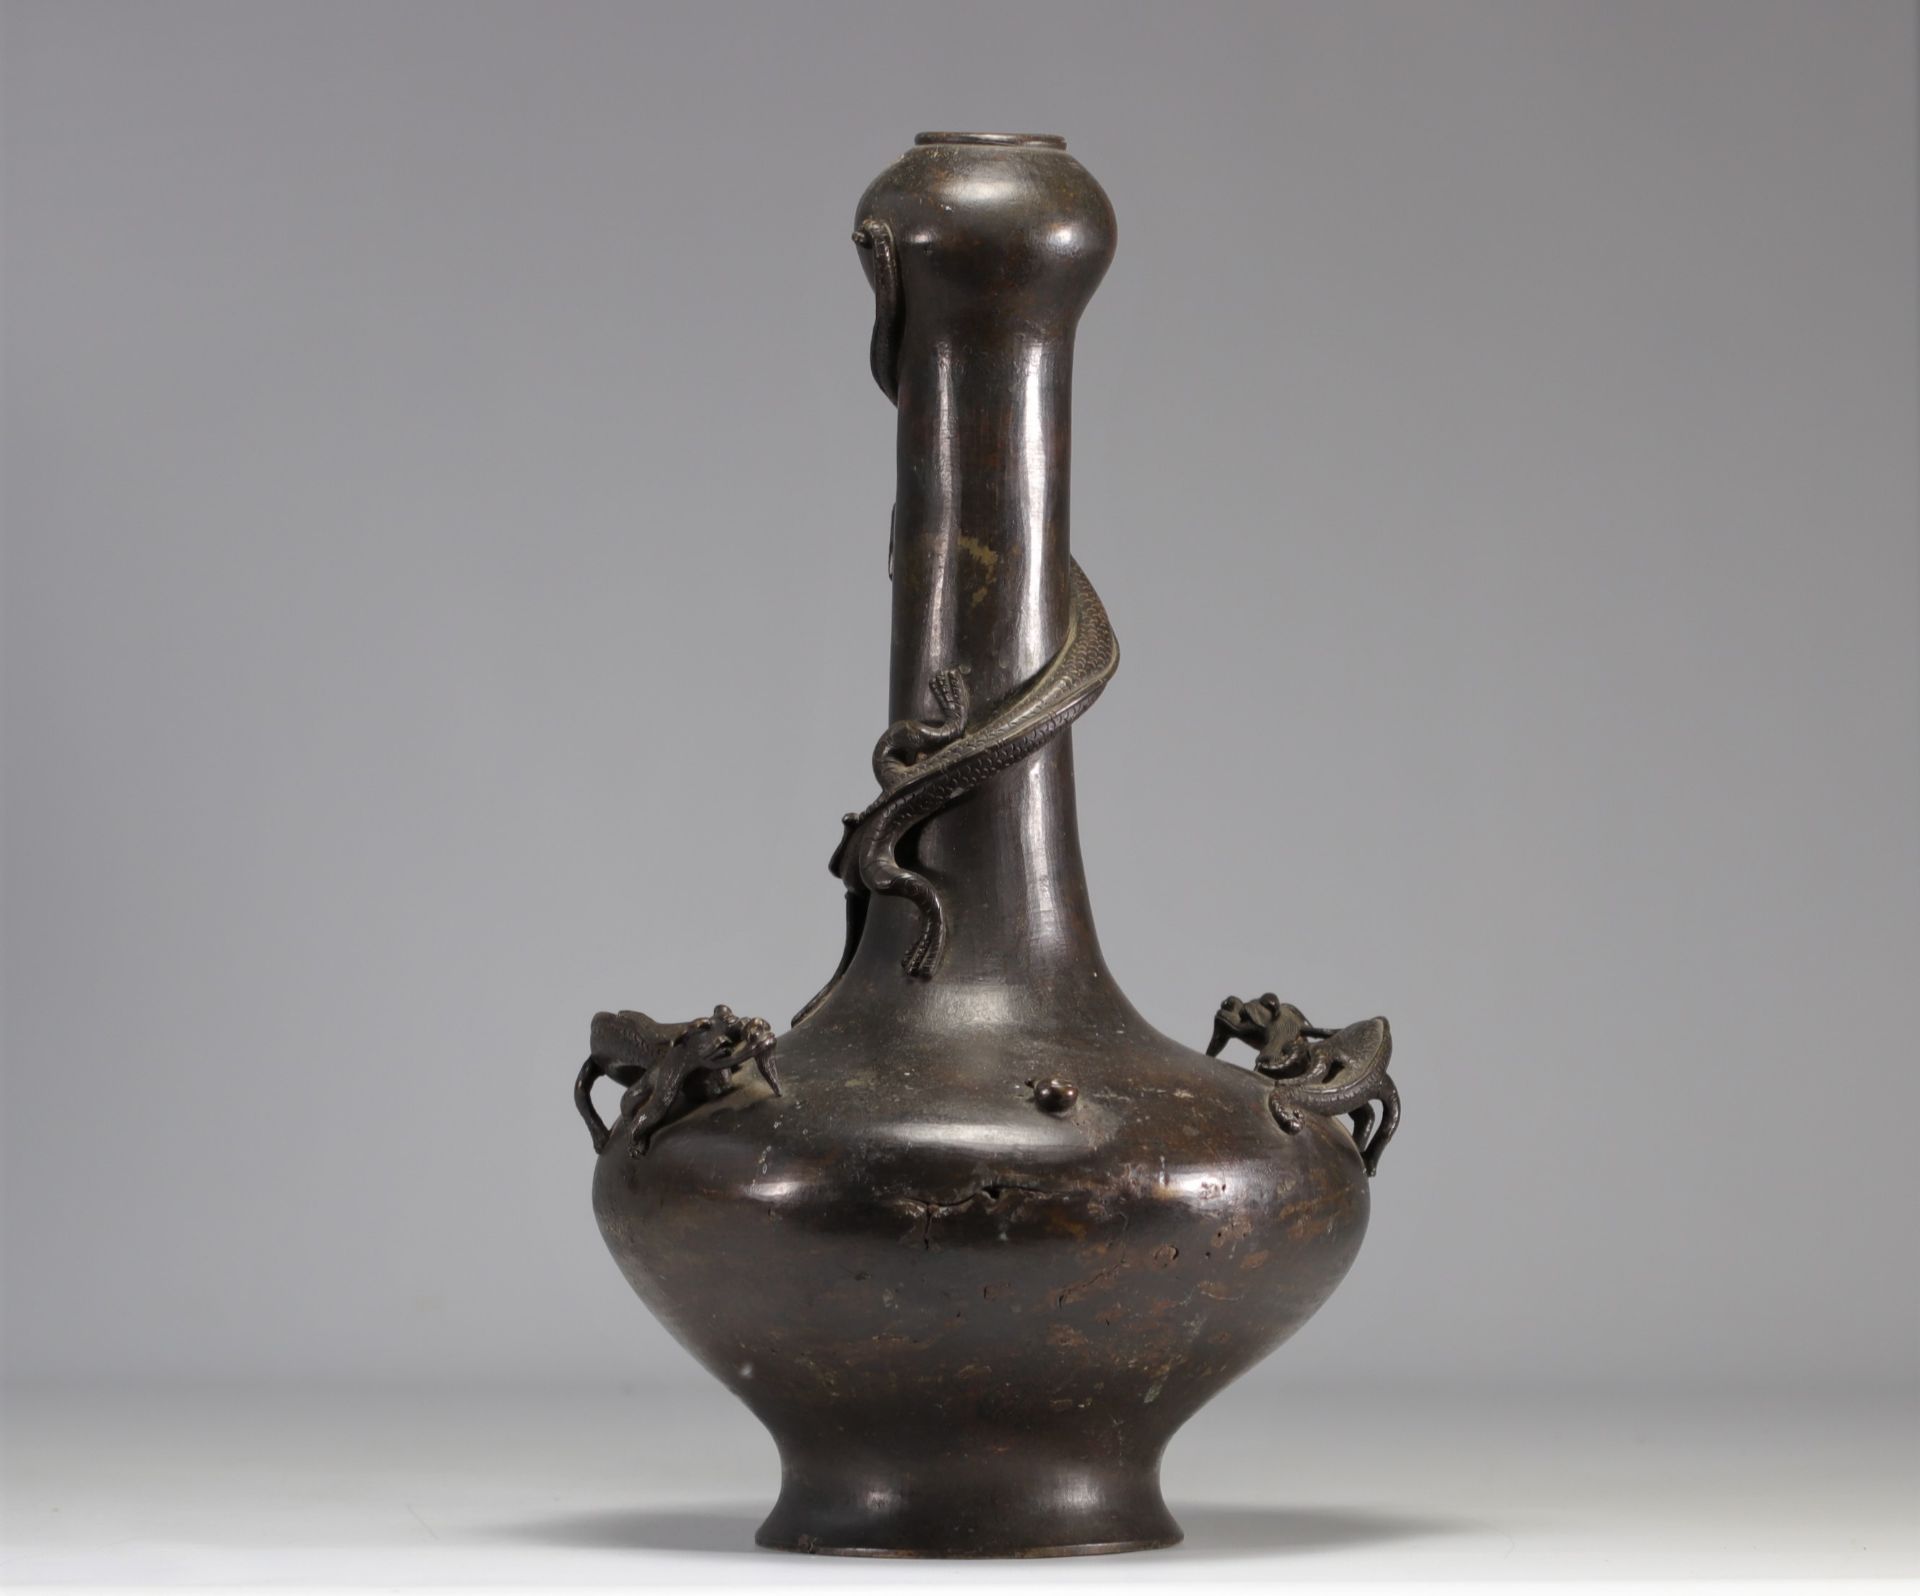 A Xuande Nian Zhi bronze bottle vase decorated with a Chilon from the Ming period (æ˜Žæœ) - Image 2 of 5